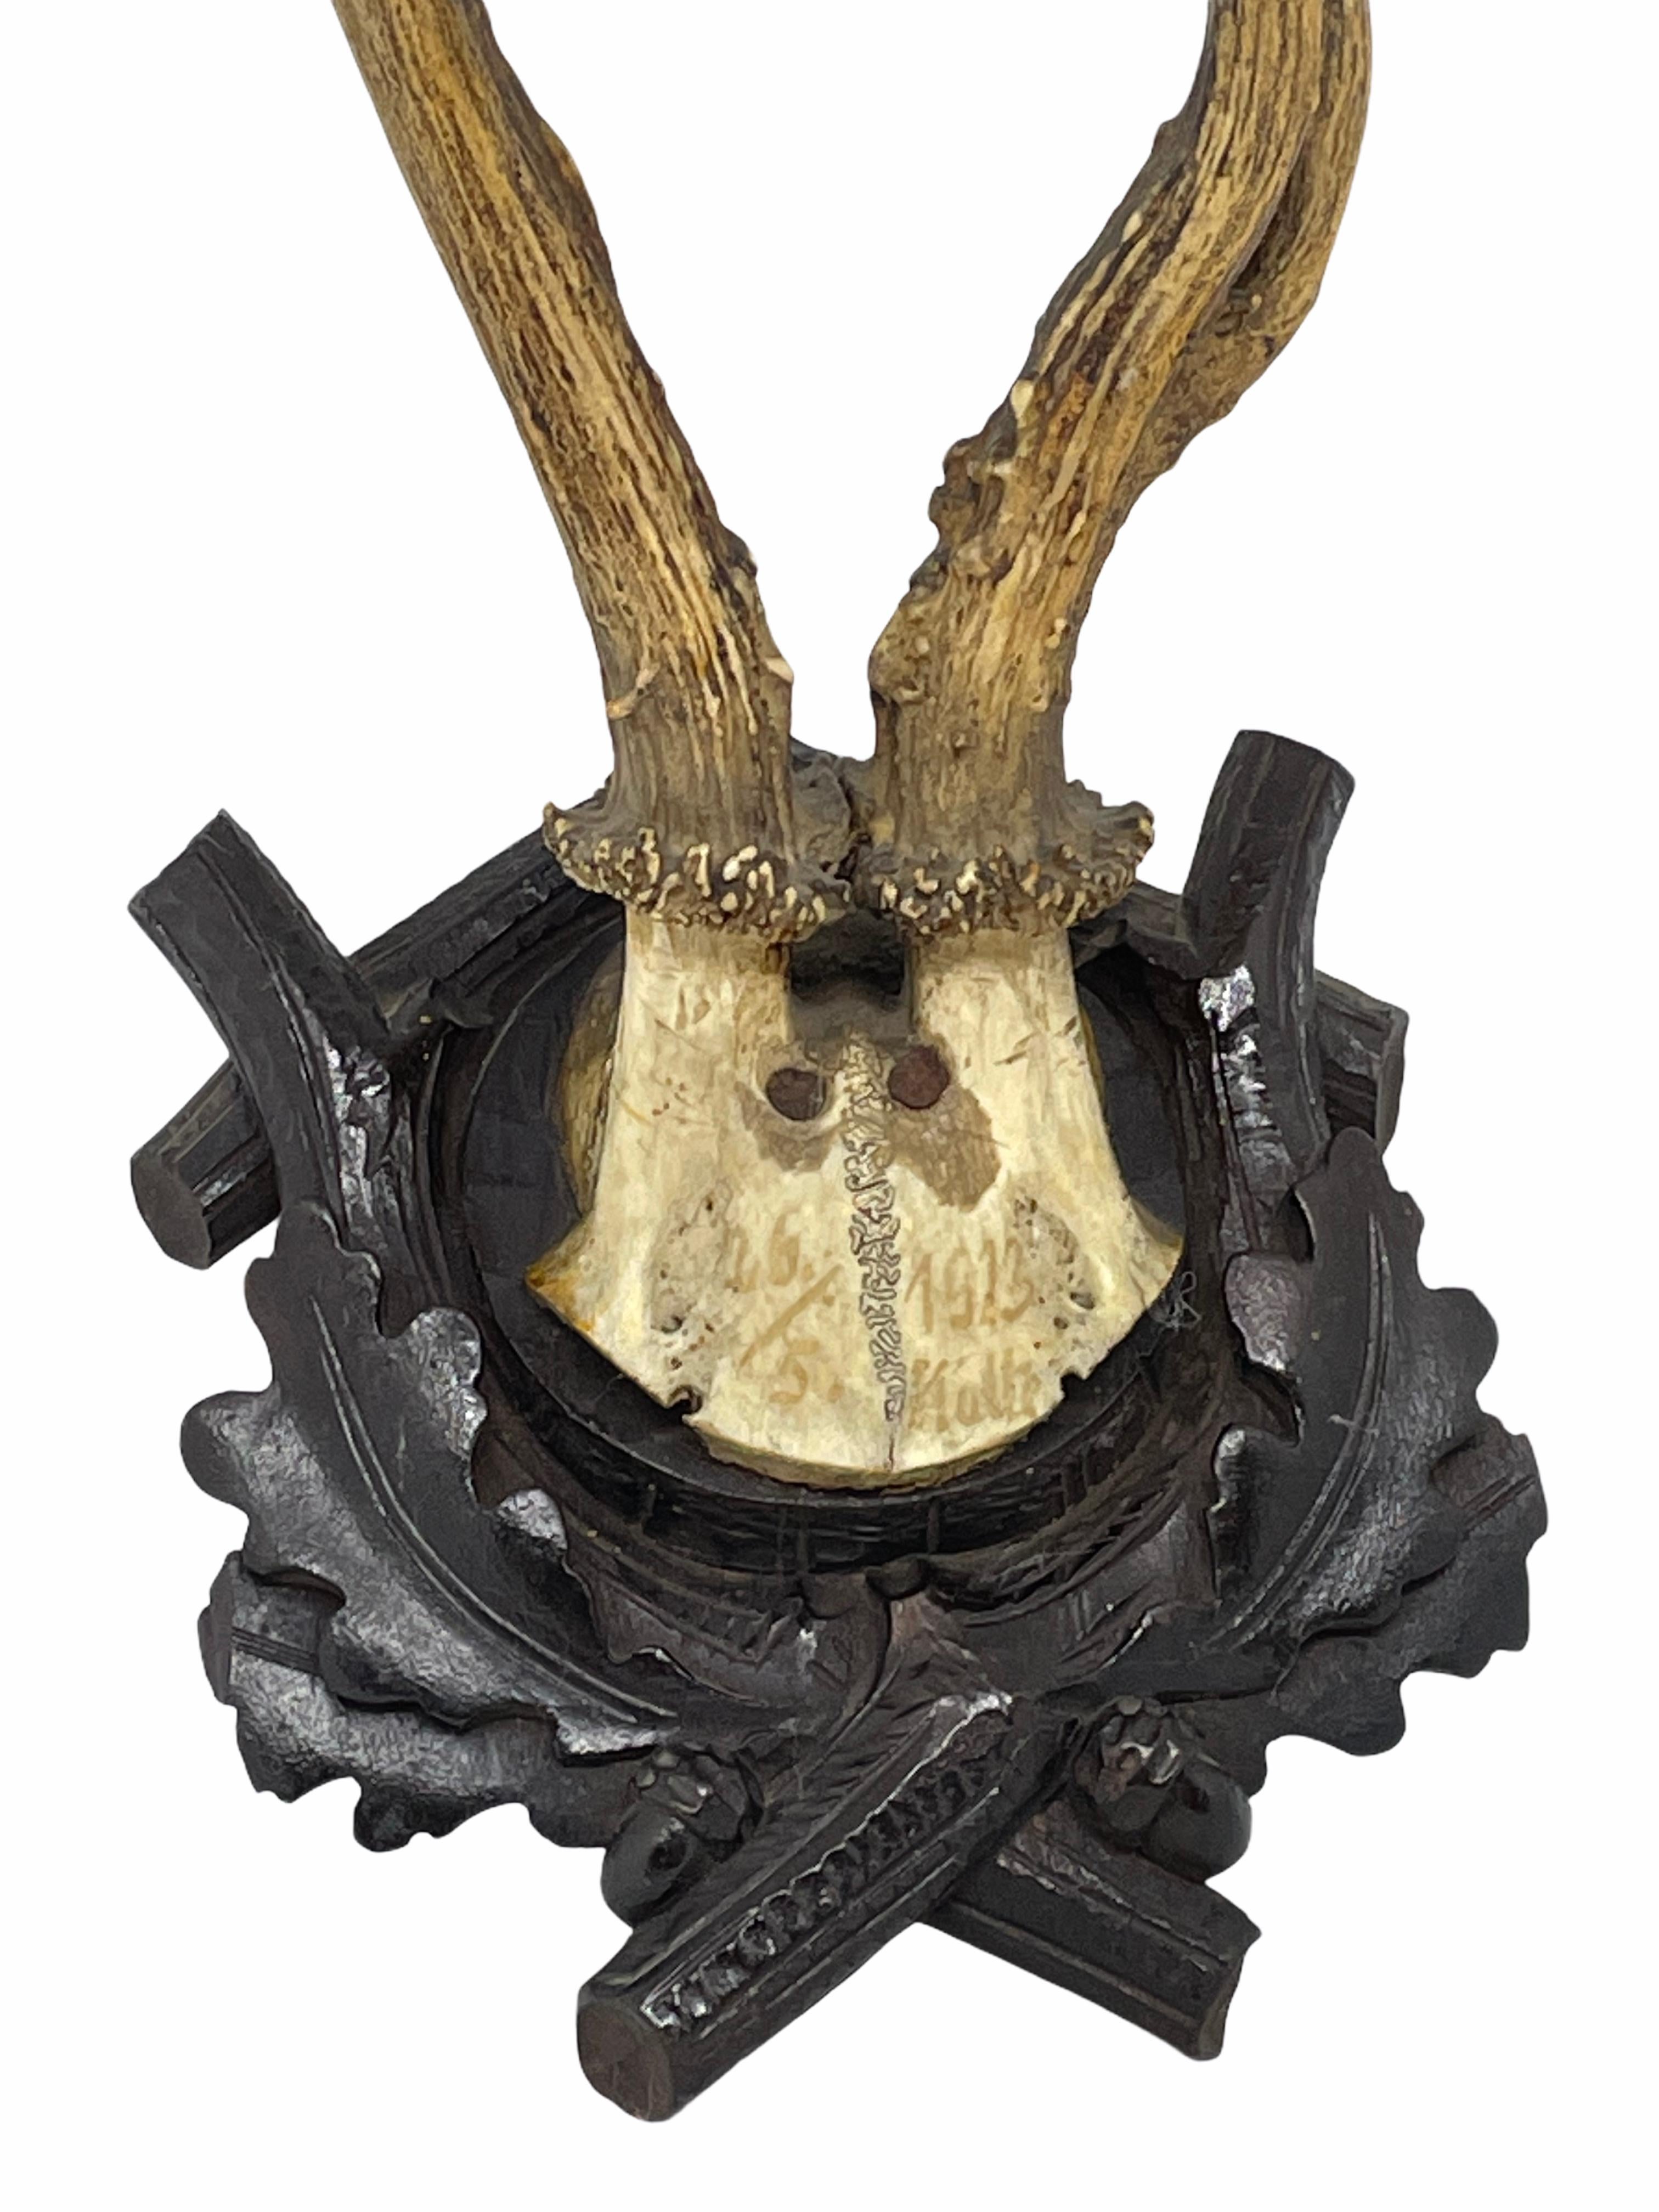 A beautiful antique Black Forest deer antler trophy on hand carved, Black Forest wooden plaque. A nice addition to your hunters loge, Cabin or just to display it in your house. Found at an estate sale in Vienna, Austria.